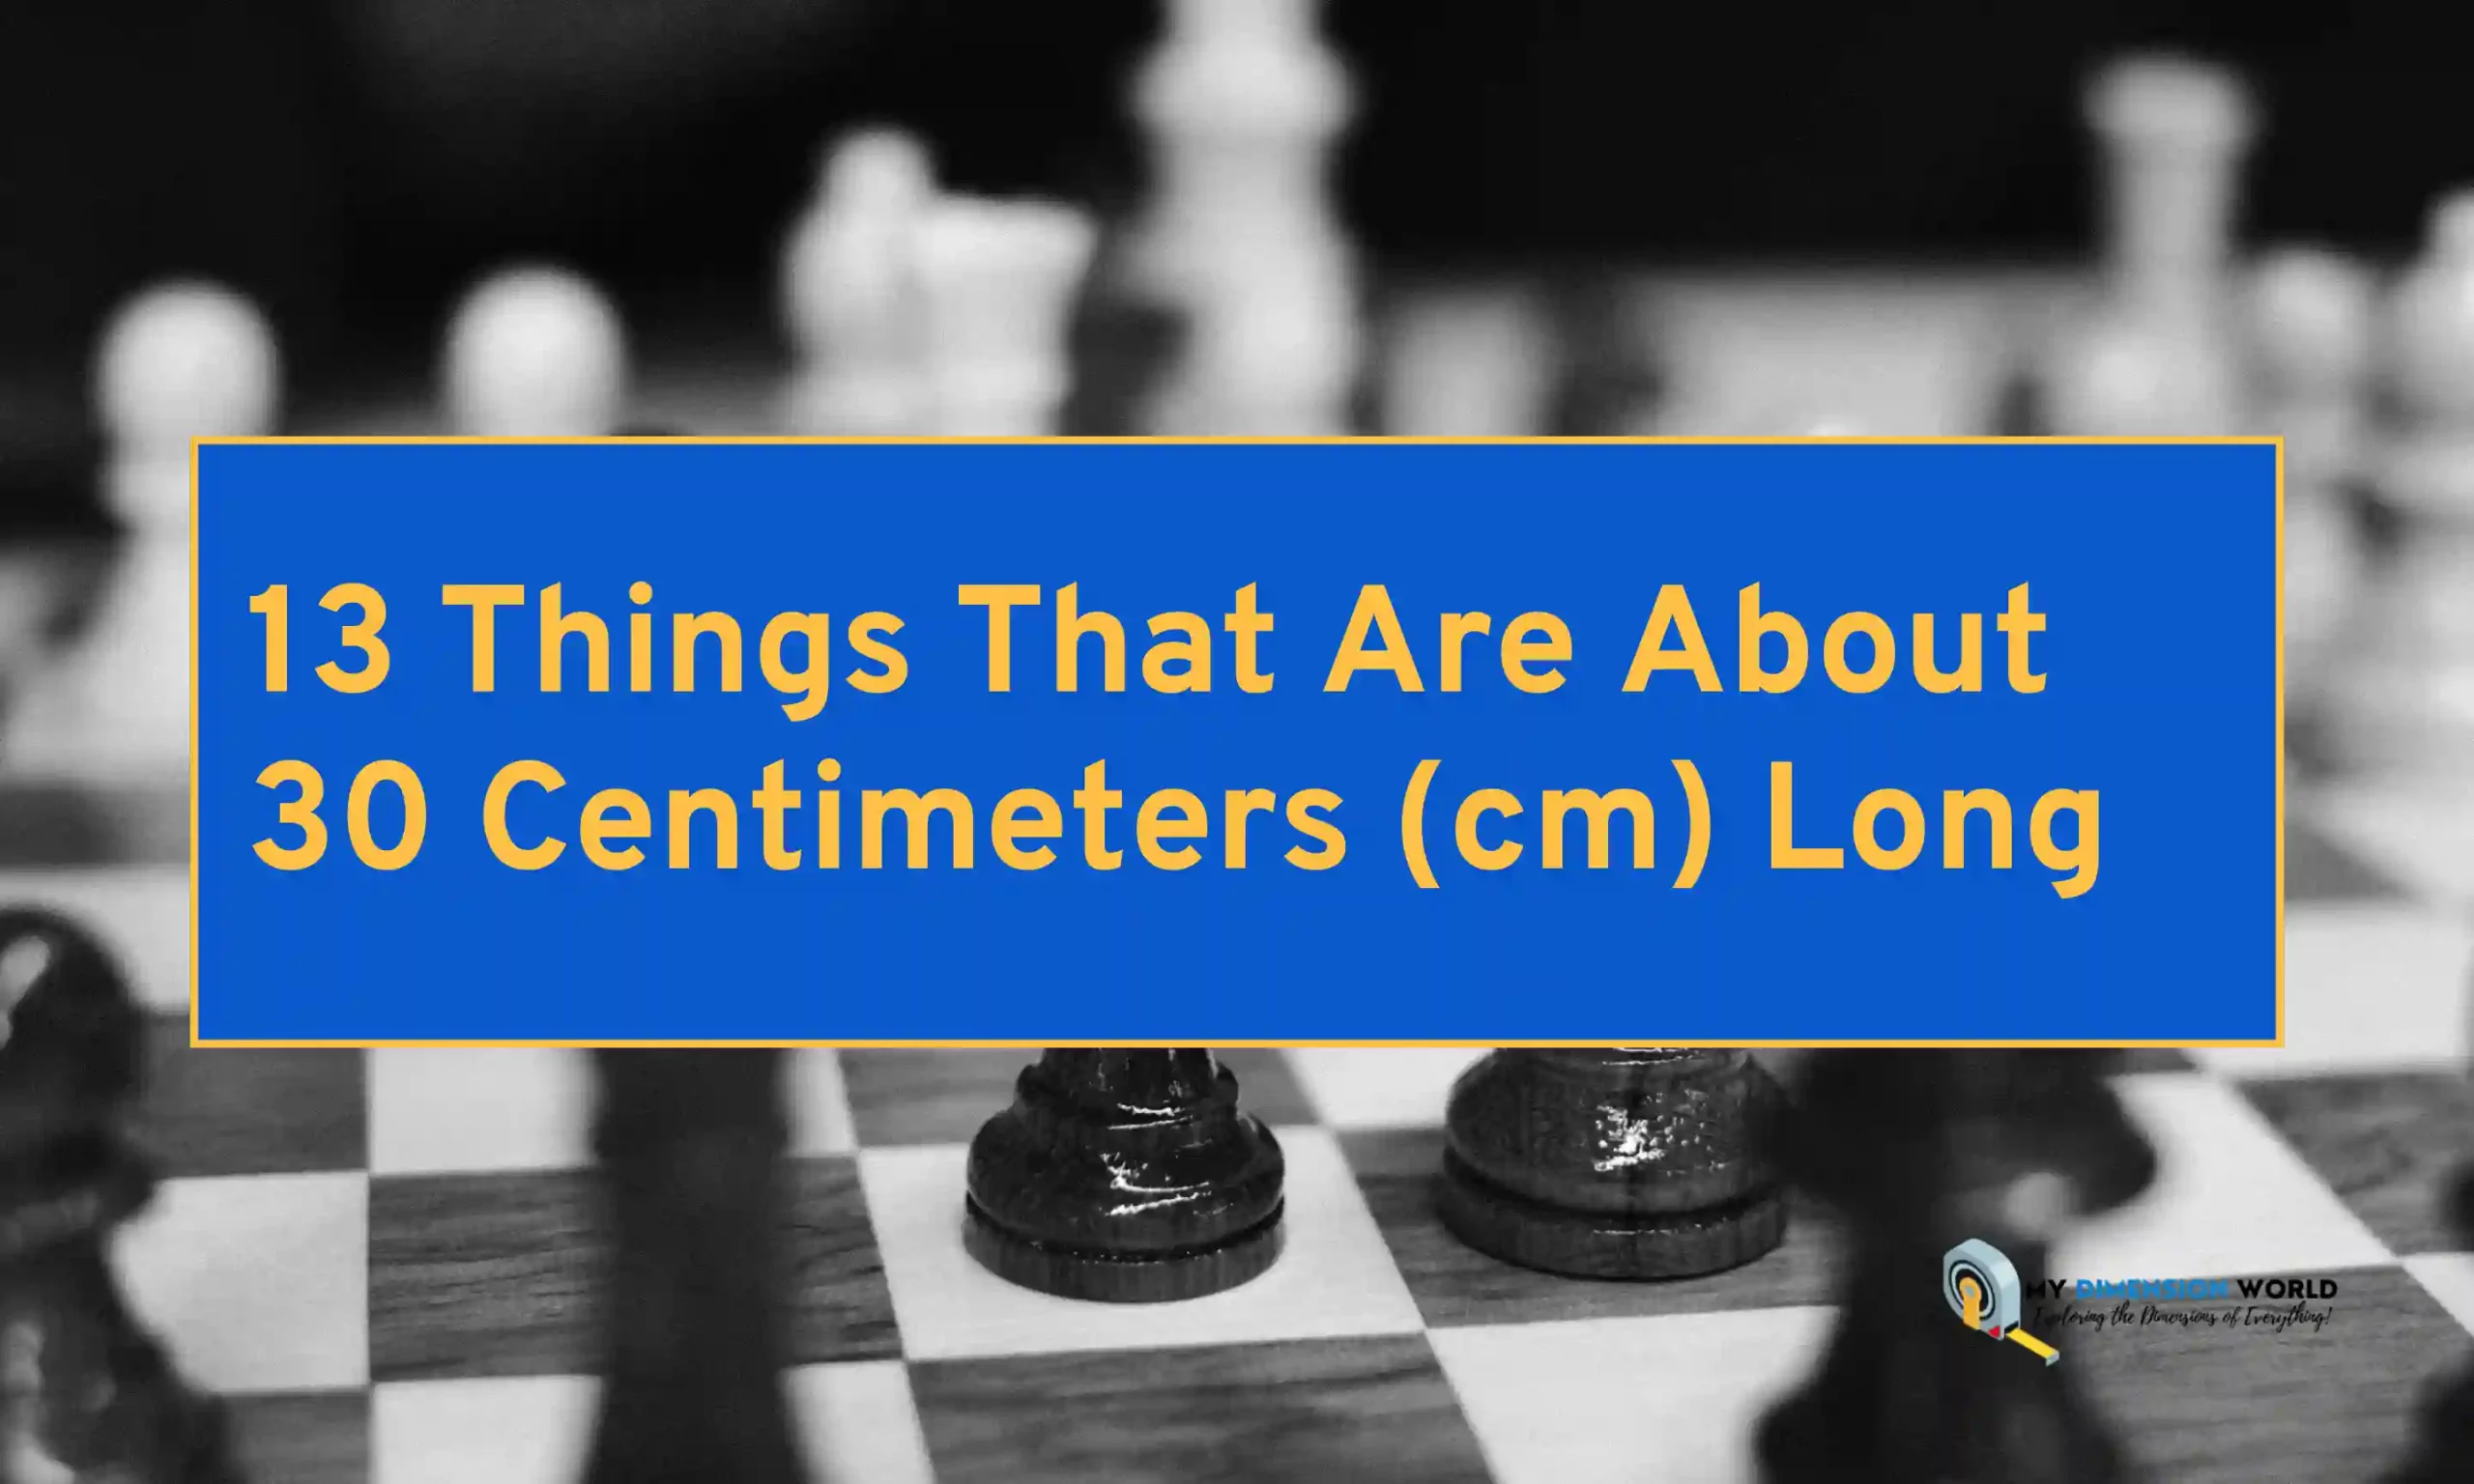 13 Things That Are About 30 Centimeters (cm) Long